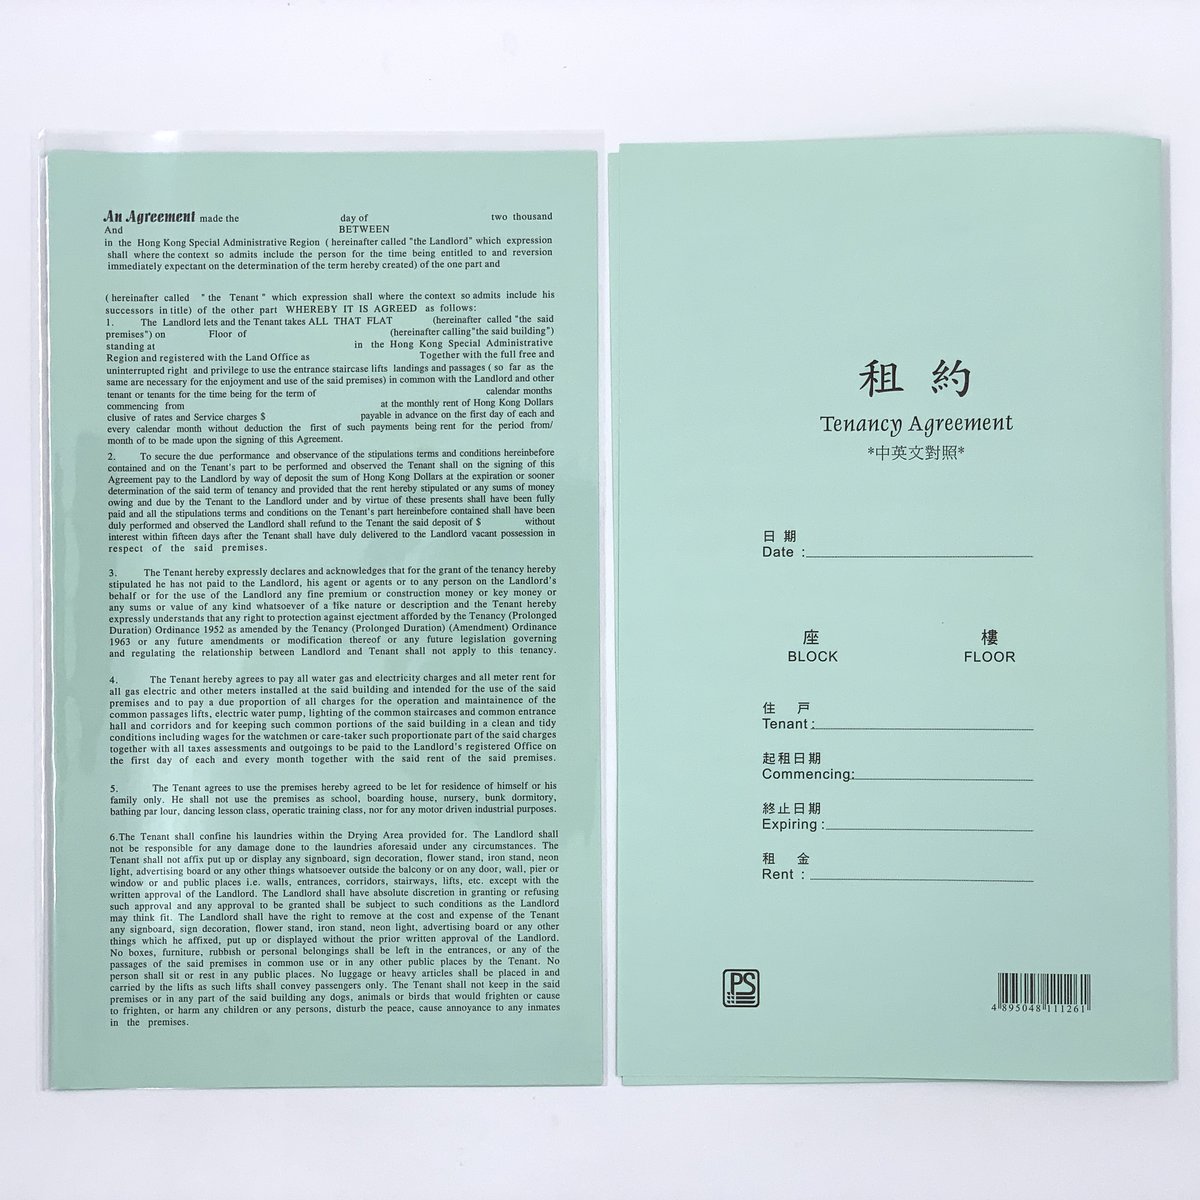 Formal Tenancy Agreement (Chinese & English Version) with Plastic holder - 6 sets.